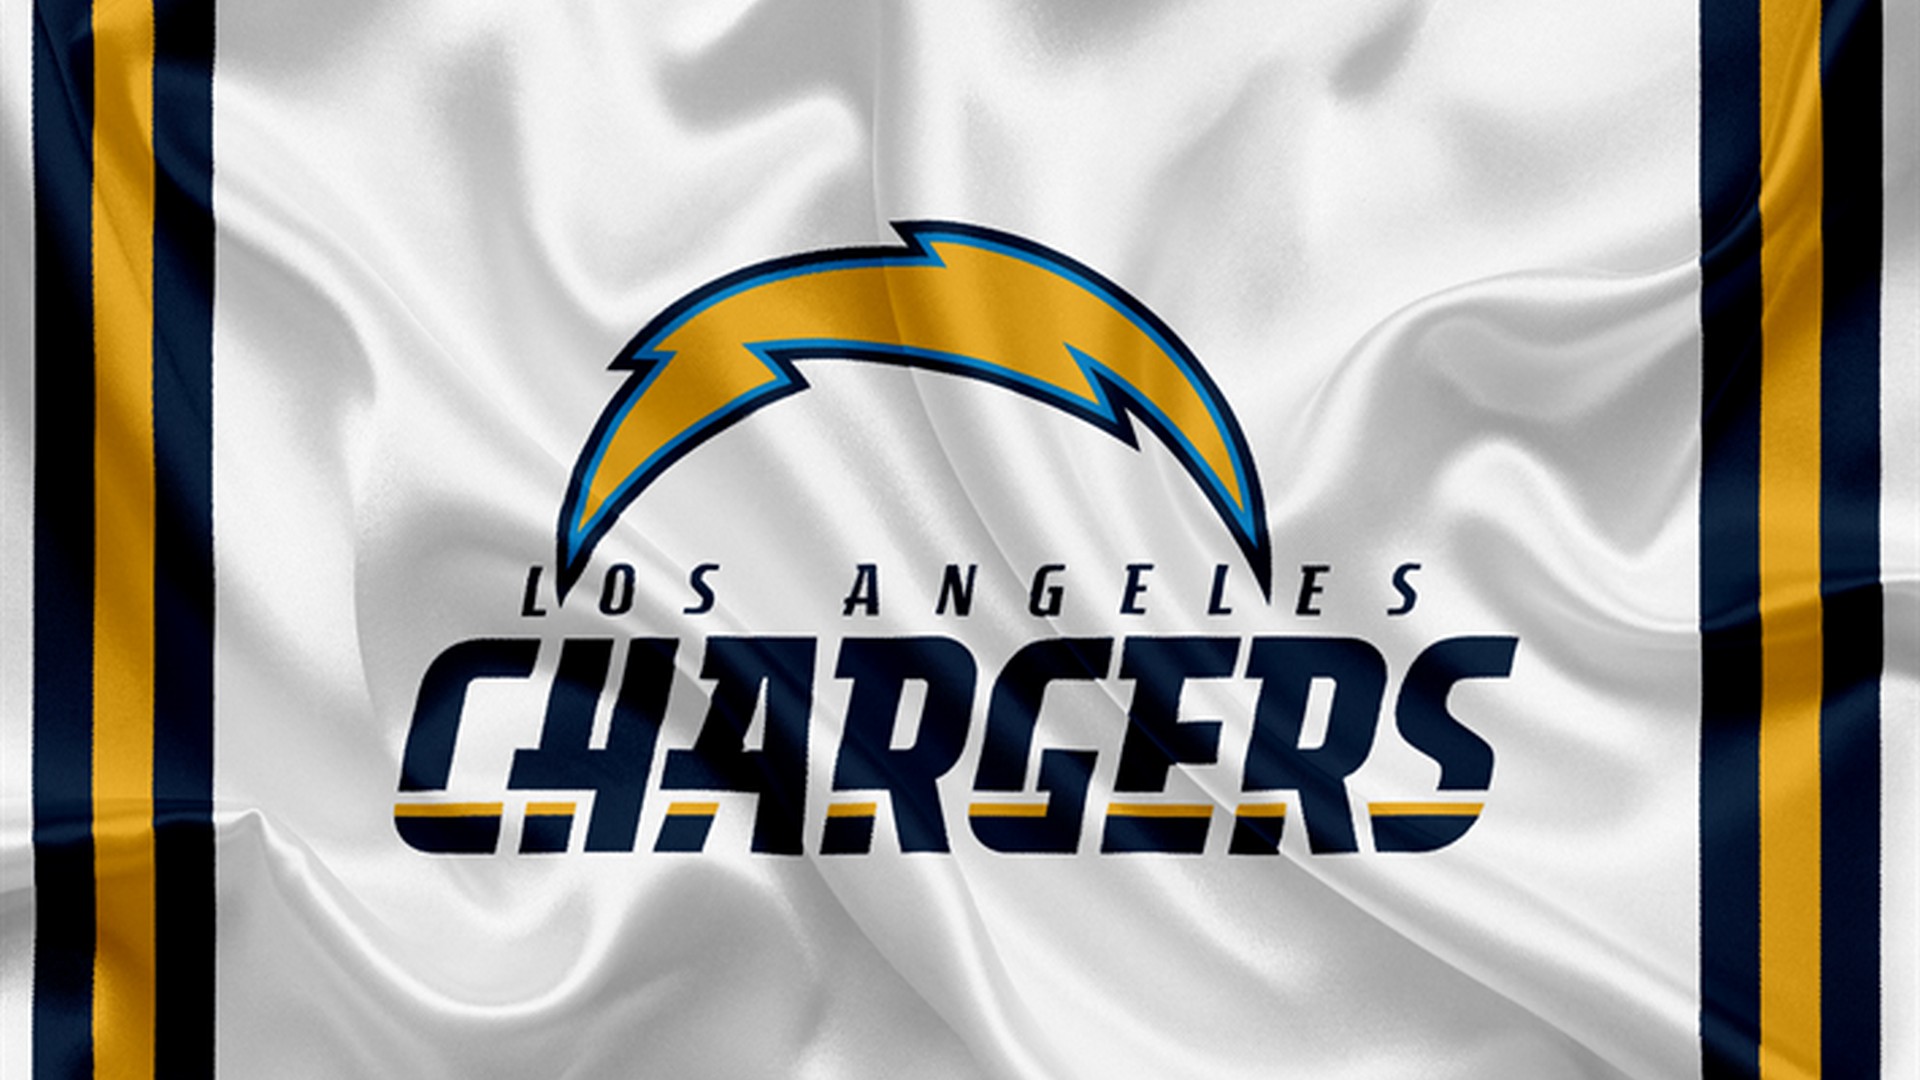 HD Los Angeles Chargers Wallpapers With Resolution 1920X1080 pixel. You can make this wallpaper for your Mac or Windows Desktop Background, iPhone, Android or Tablet and another Smartphone device for free